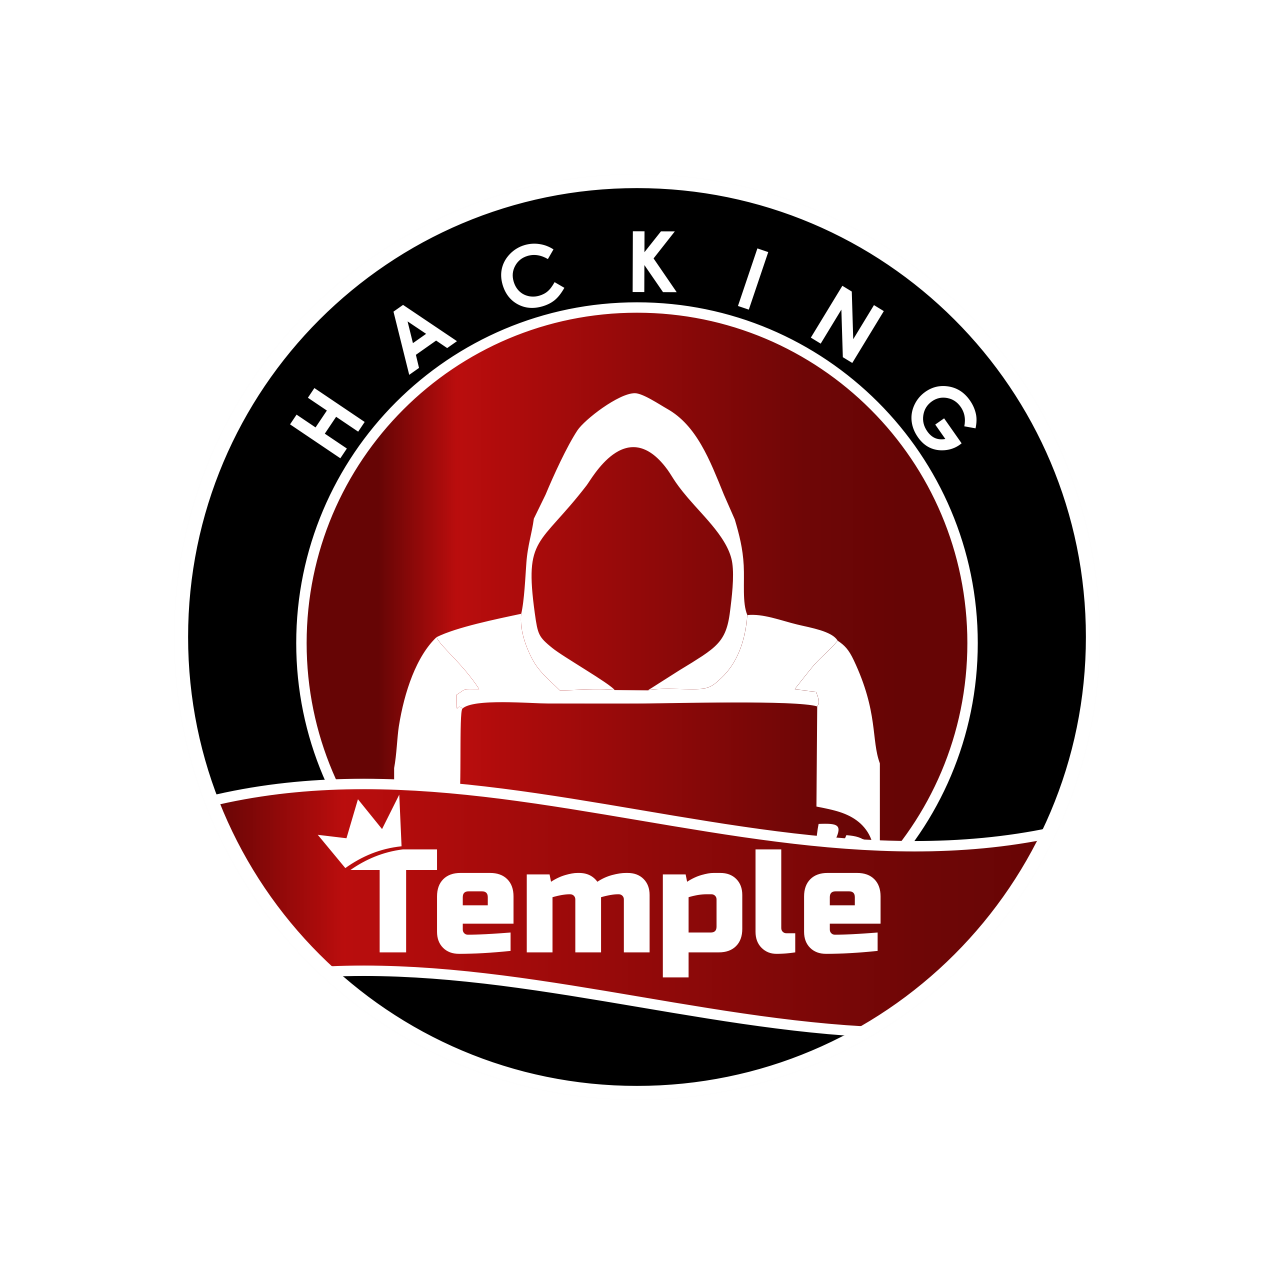 Hacking Temple